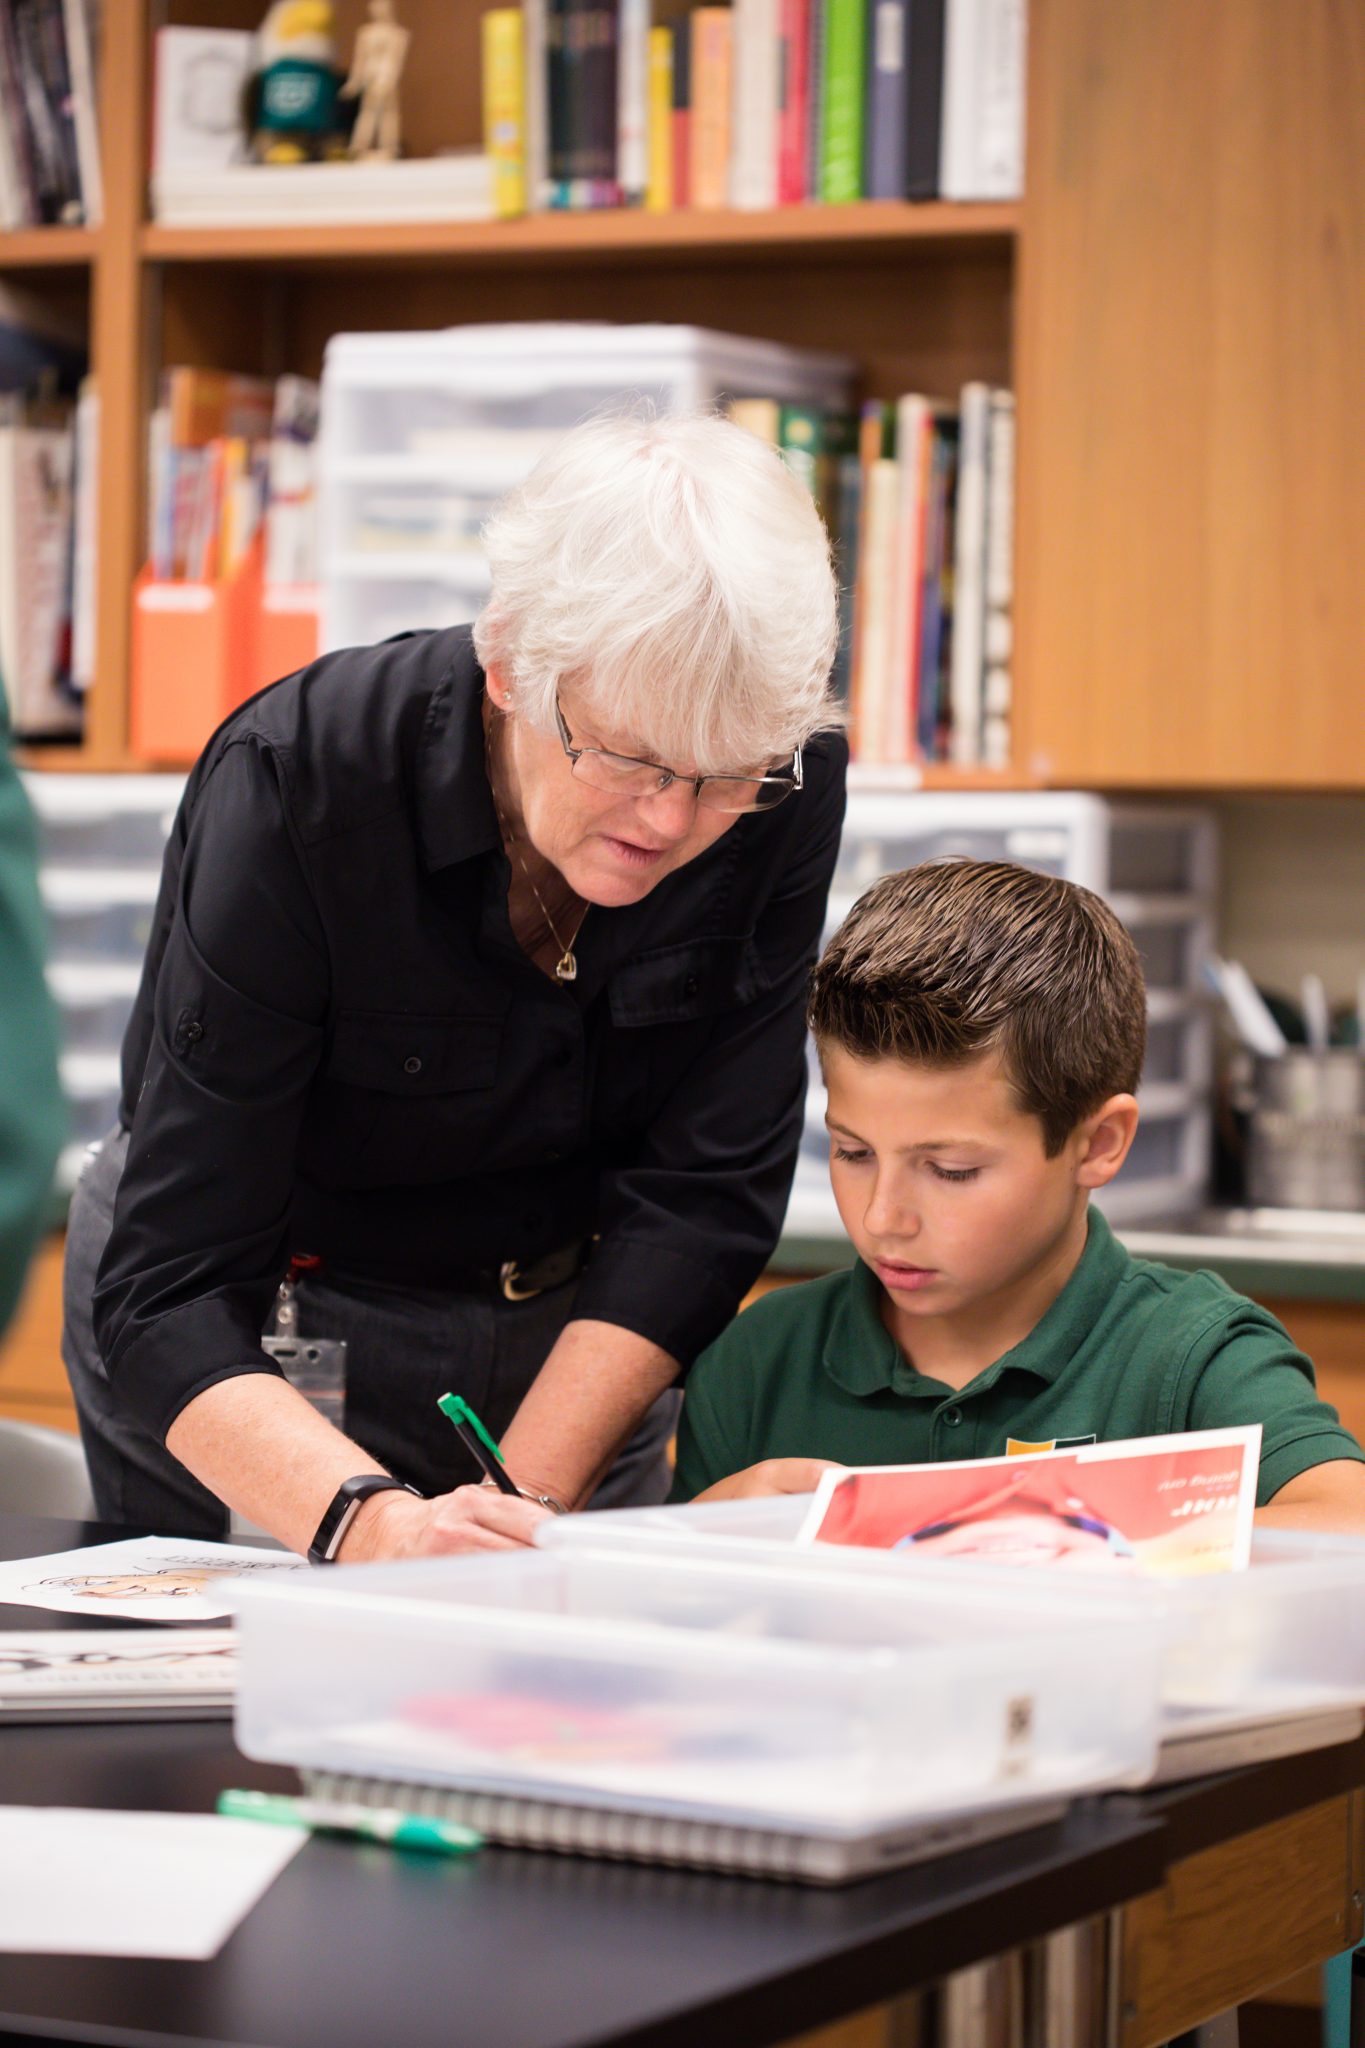 Lin Mayberry, middle school art teacher, working with a male student